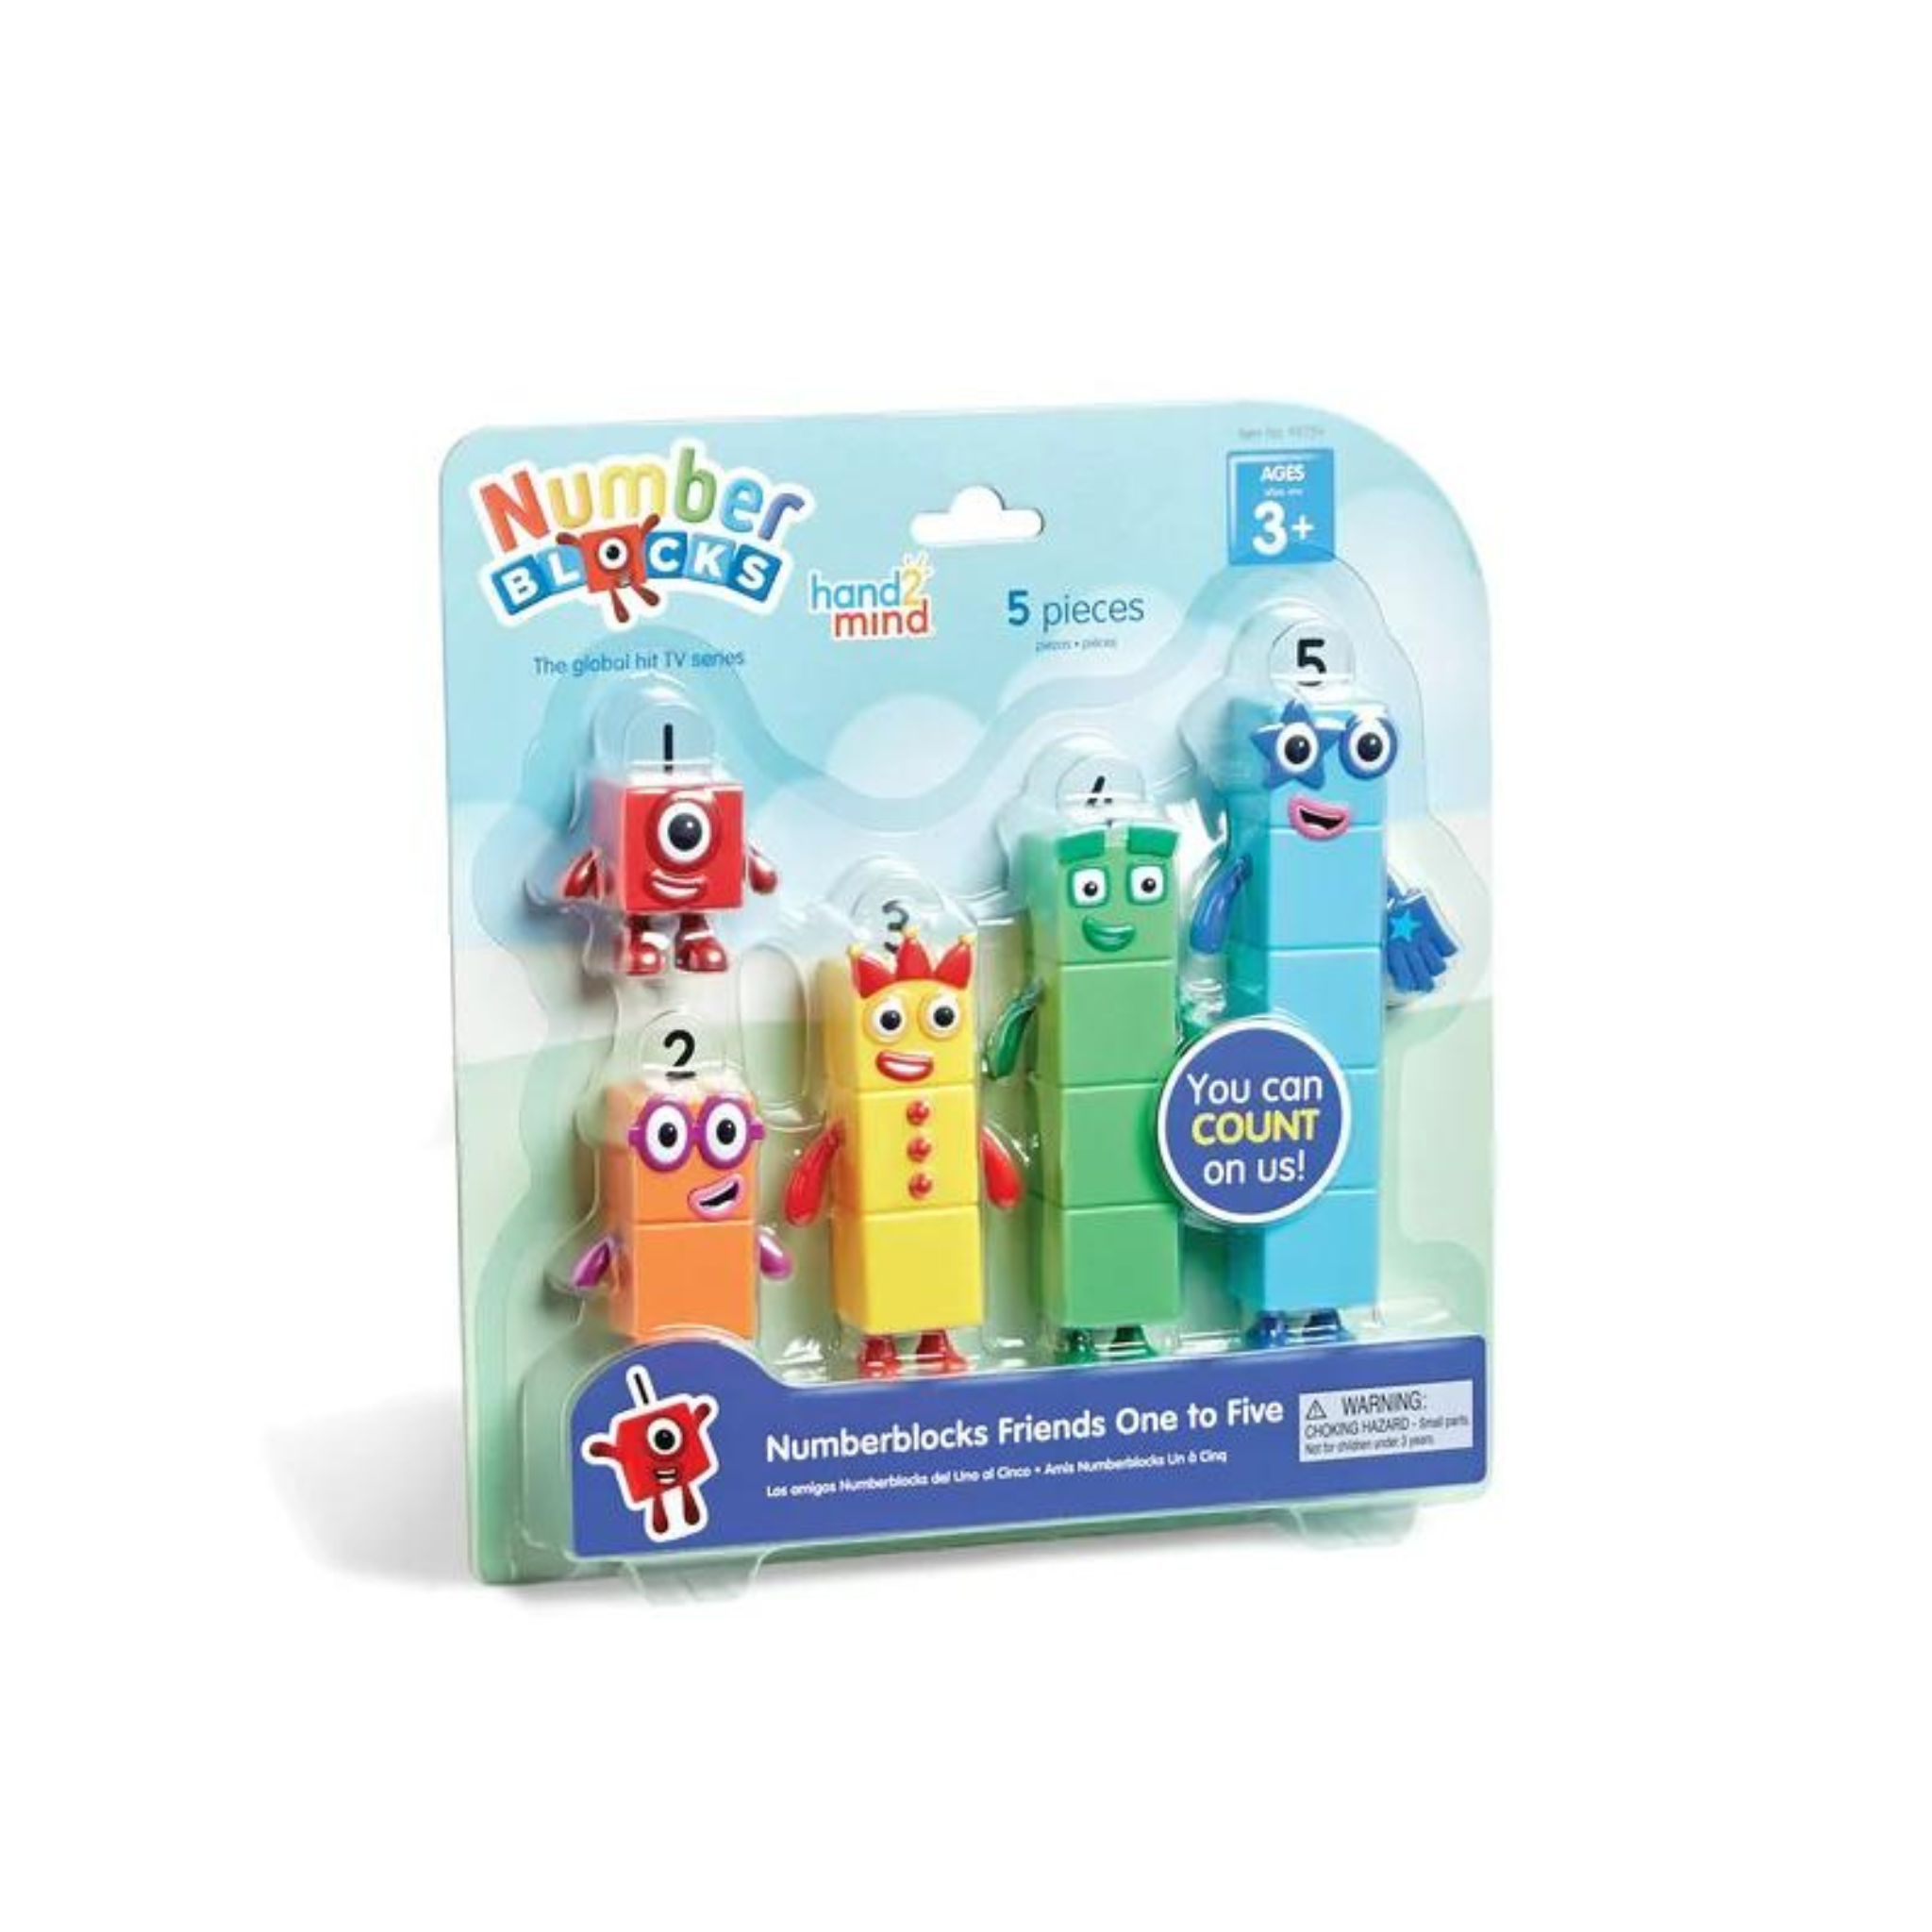 5-Piece Numberblocks Friends One to Five Figures